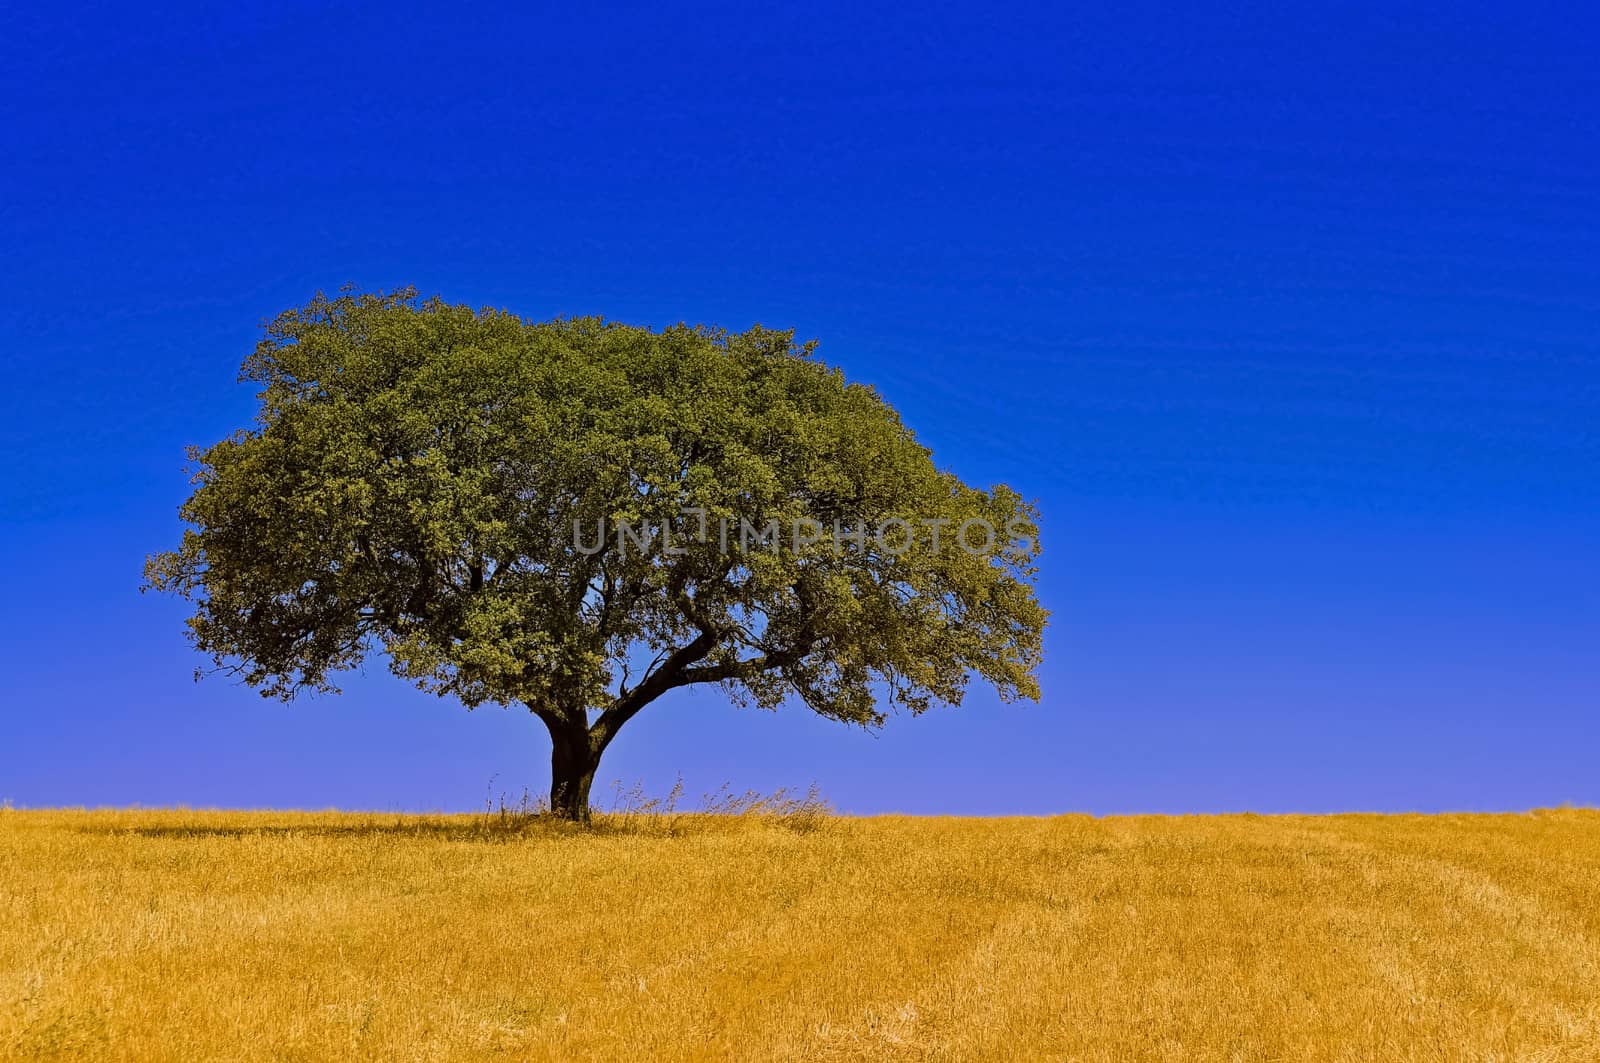 Quiet view over an open field of farmland with a lonely tree and beautiful sky.